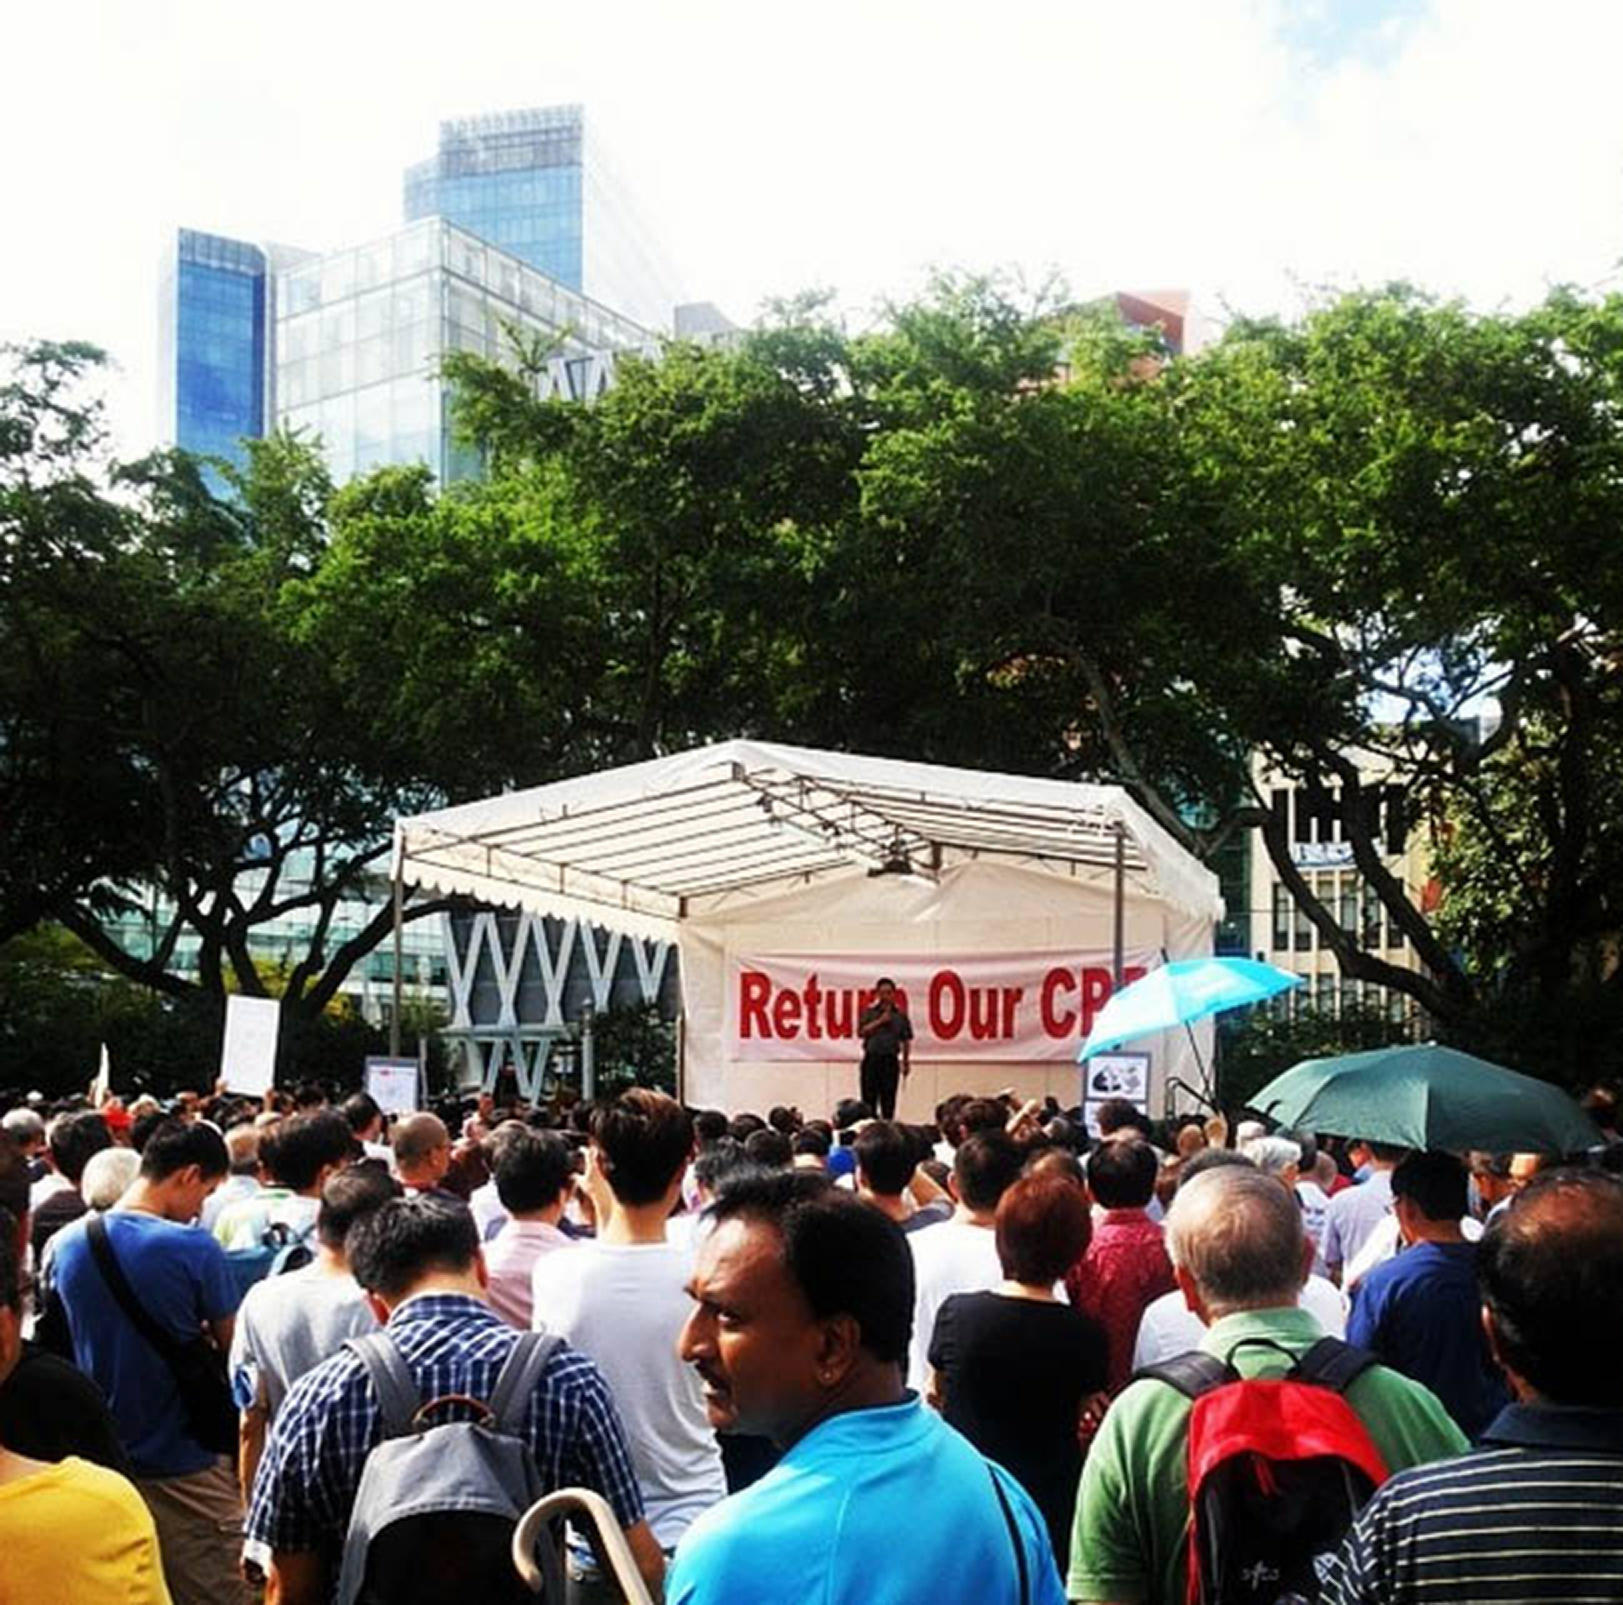 Crowds turn out for yesterday's protest in Singapore.